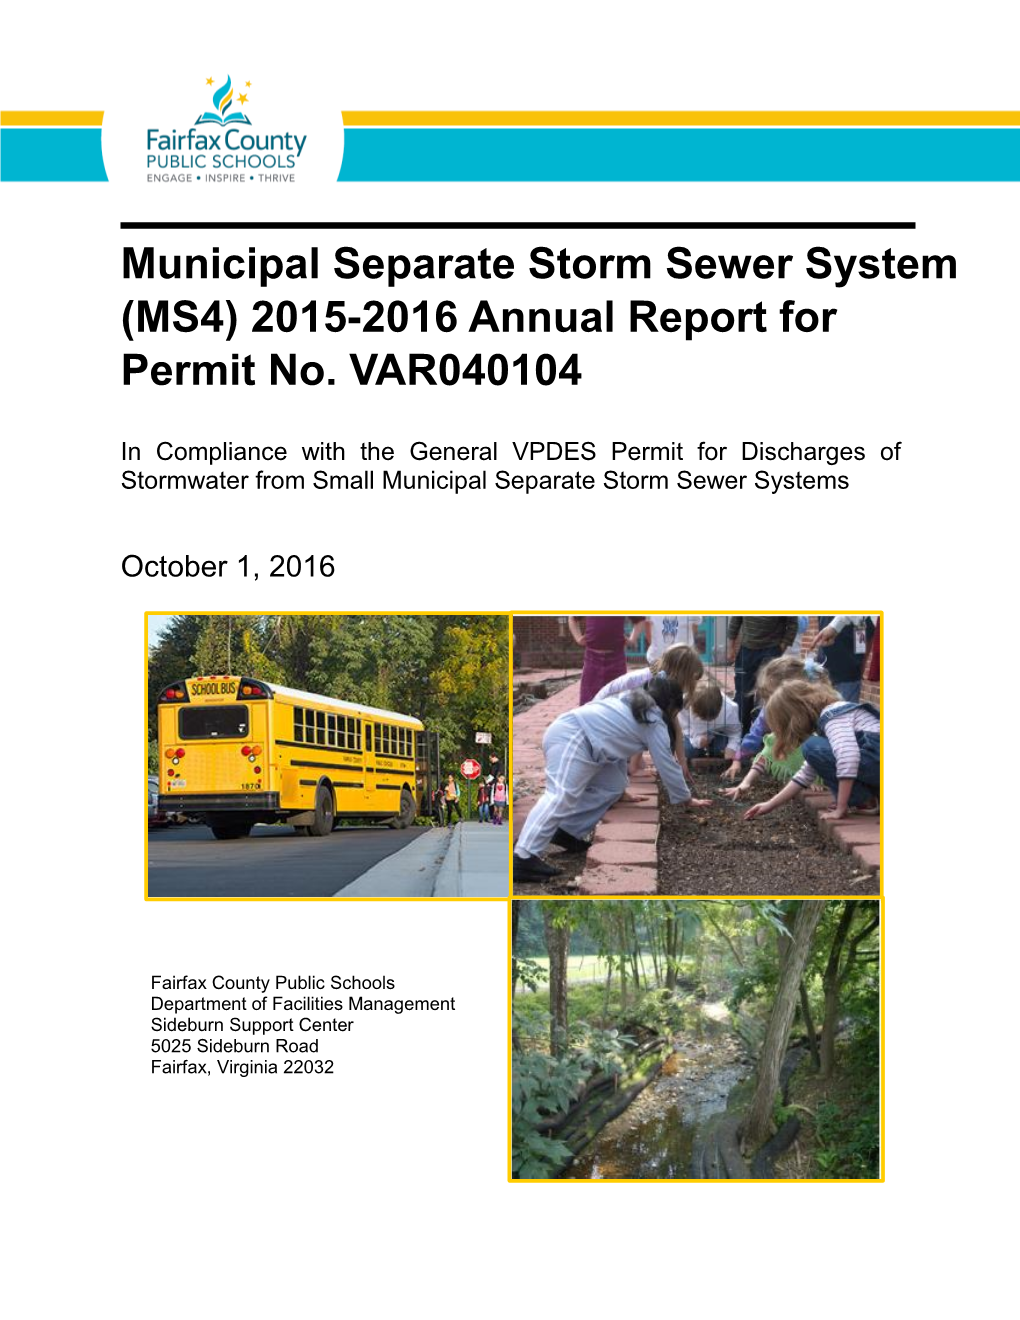 2015-2016 MS4 Annual Report October 1, 2016